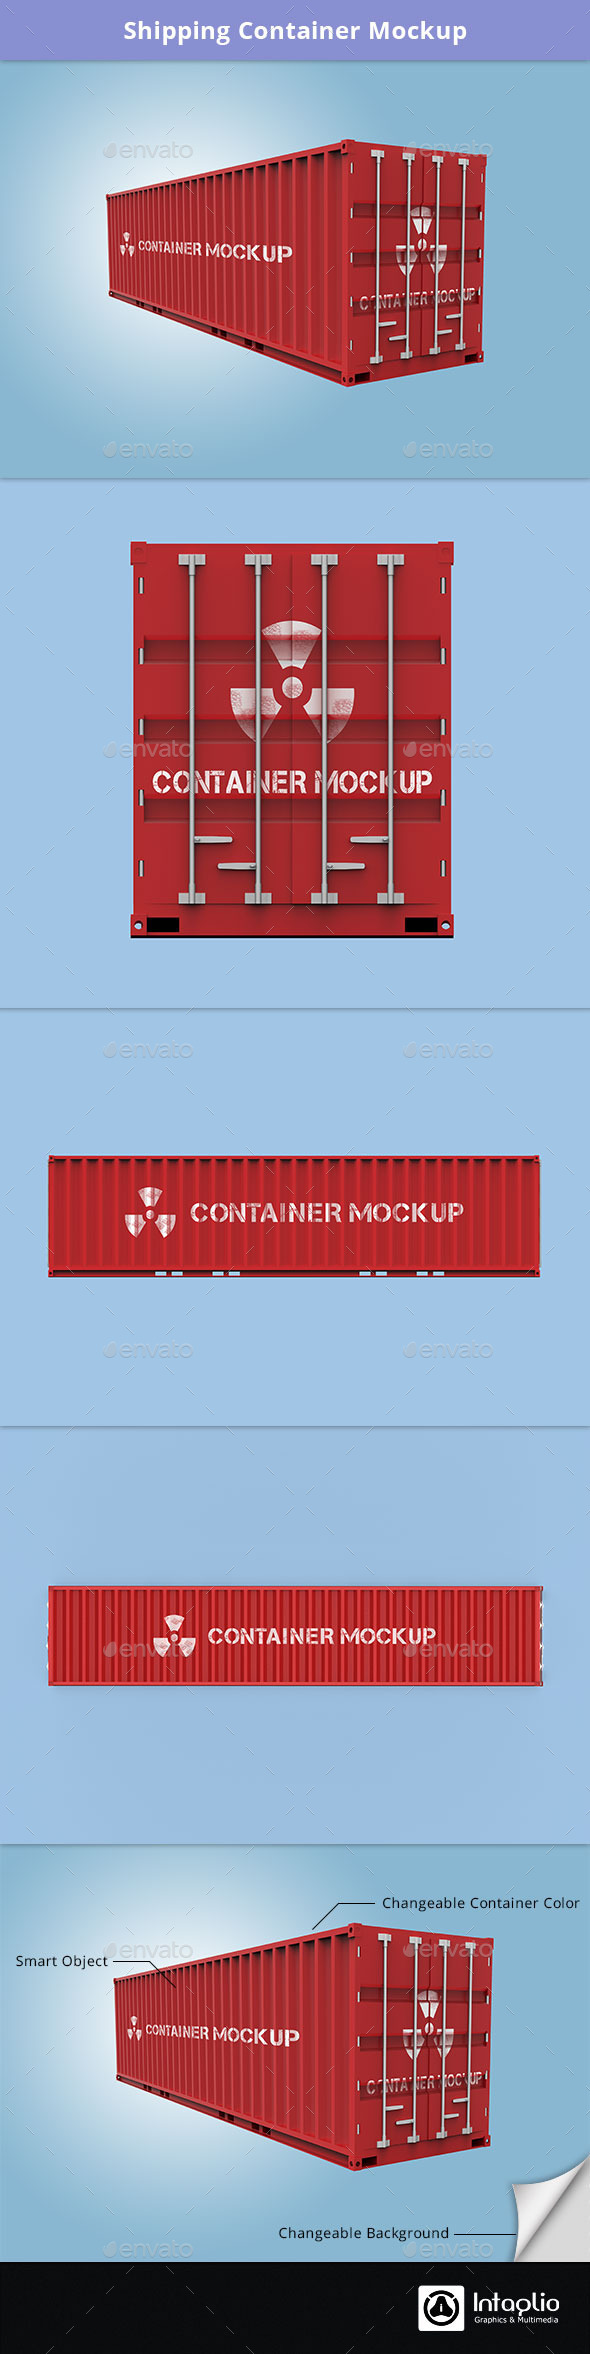 Download Shipping Container Mockup by mudi | GraphicRiver